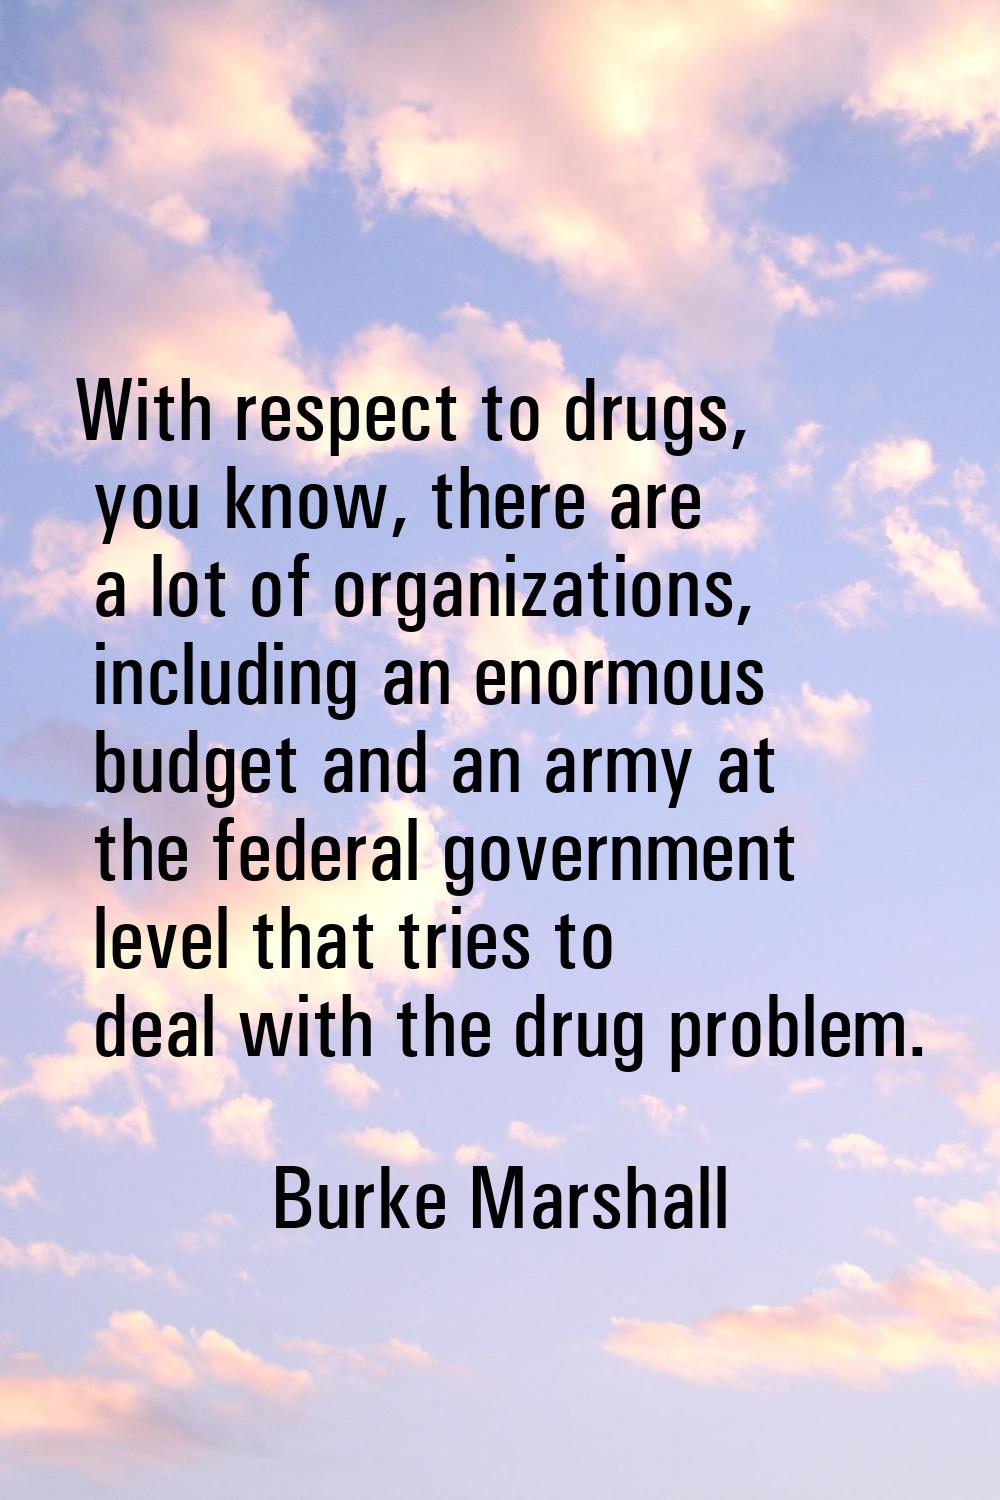 With respect to drugs, you know, there are a lot of organizations, including an enormous budget and